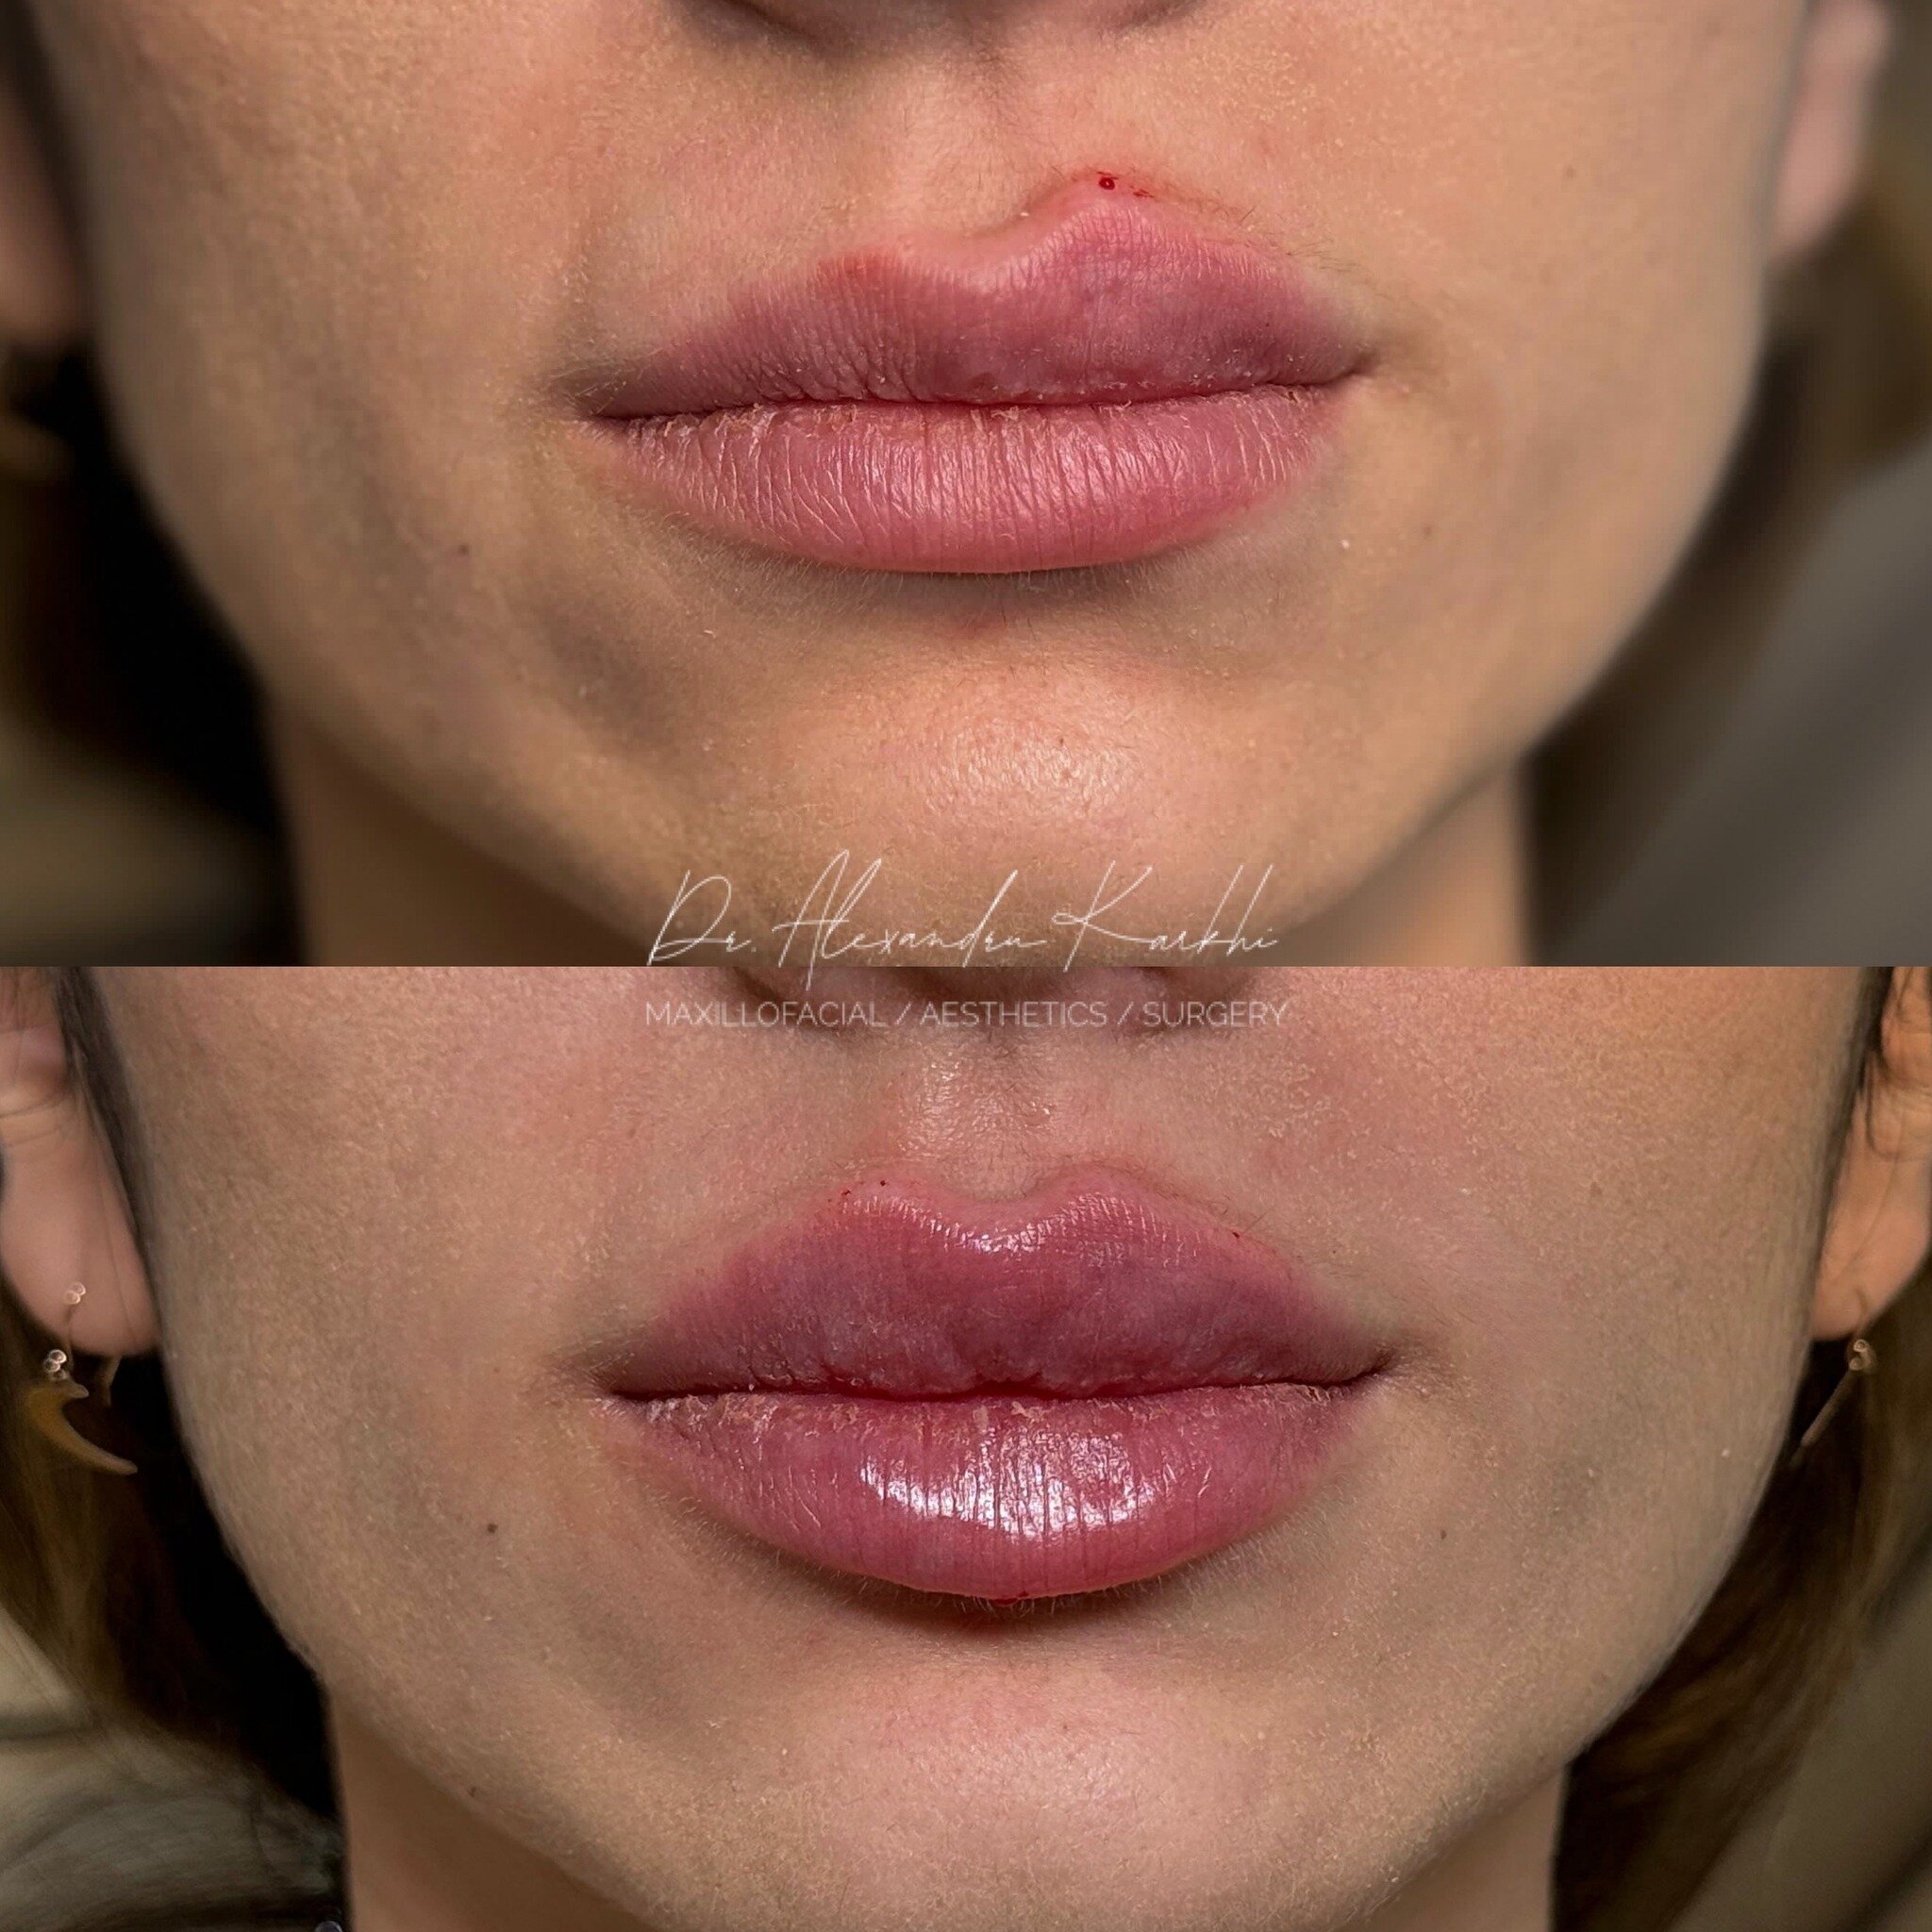 DR.K Lips 💉👄

Exclusively available at CLINICA DR.K Medical Centers ⚜️

😷 Treatment: Non-surgical Lips enhancement
🎯 Purpose: to project and to create the right proportions of the upper and lower Lips
👓 How it works: Non-Surgical augmentation us